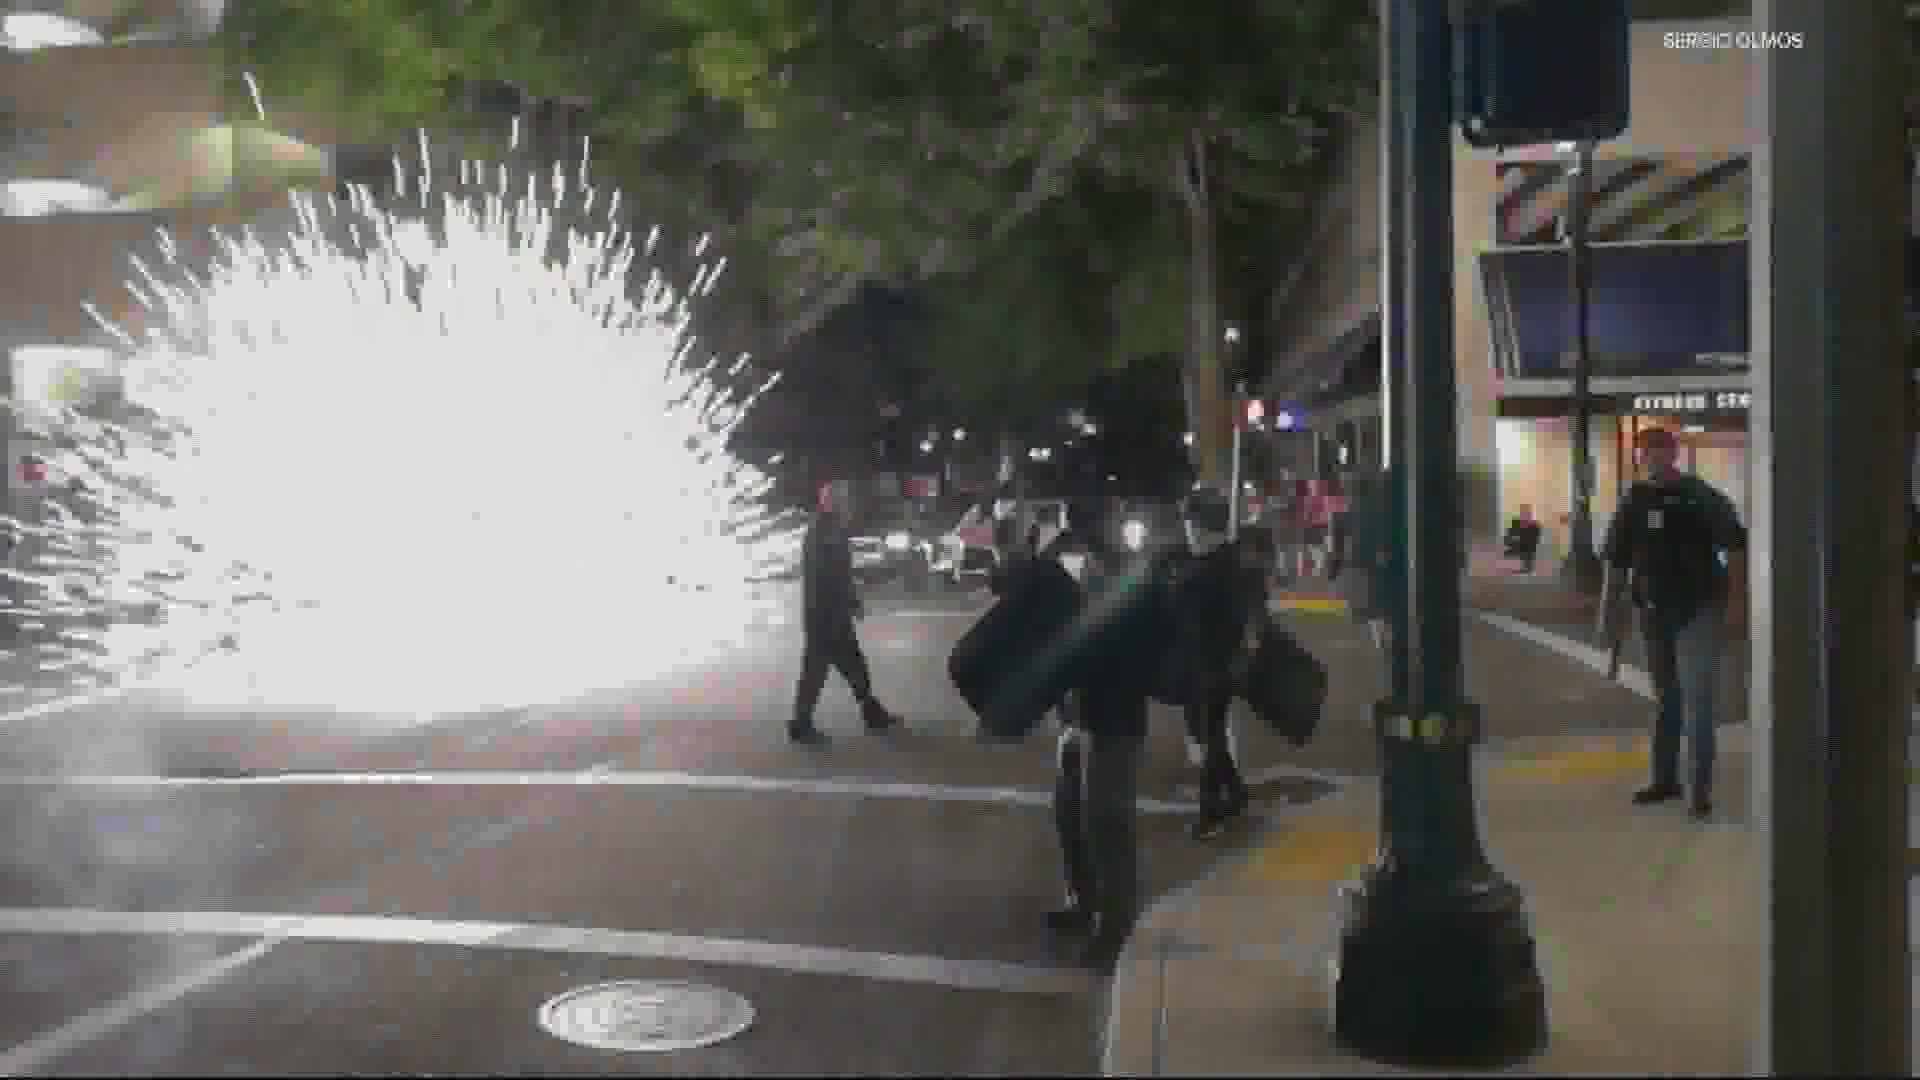 Right-wing and left-wing protesters fought downtown with paintballs, mace and fireworks, but police made no arrests and largely did not intervene.